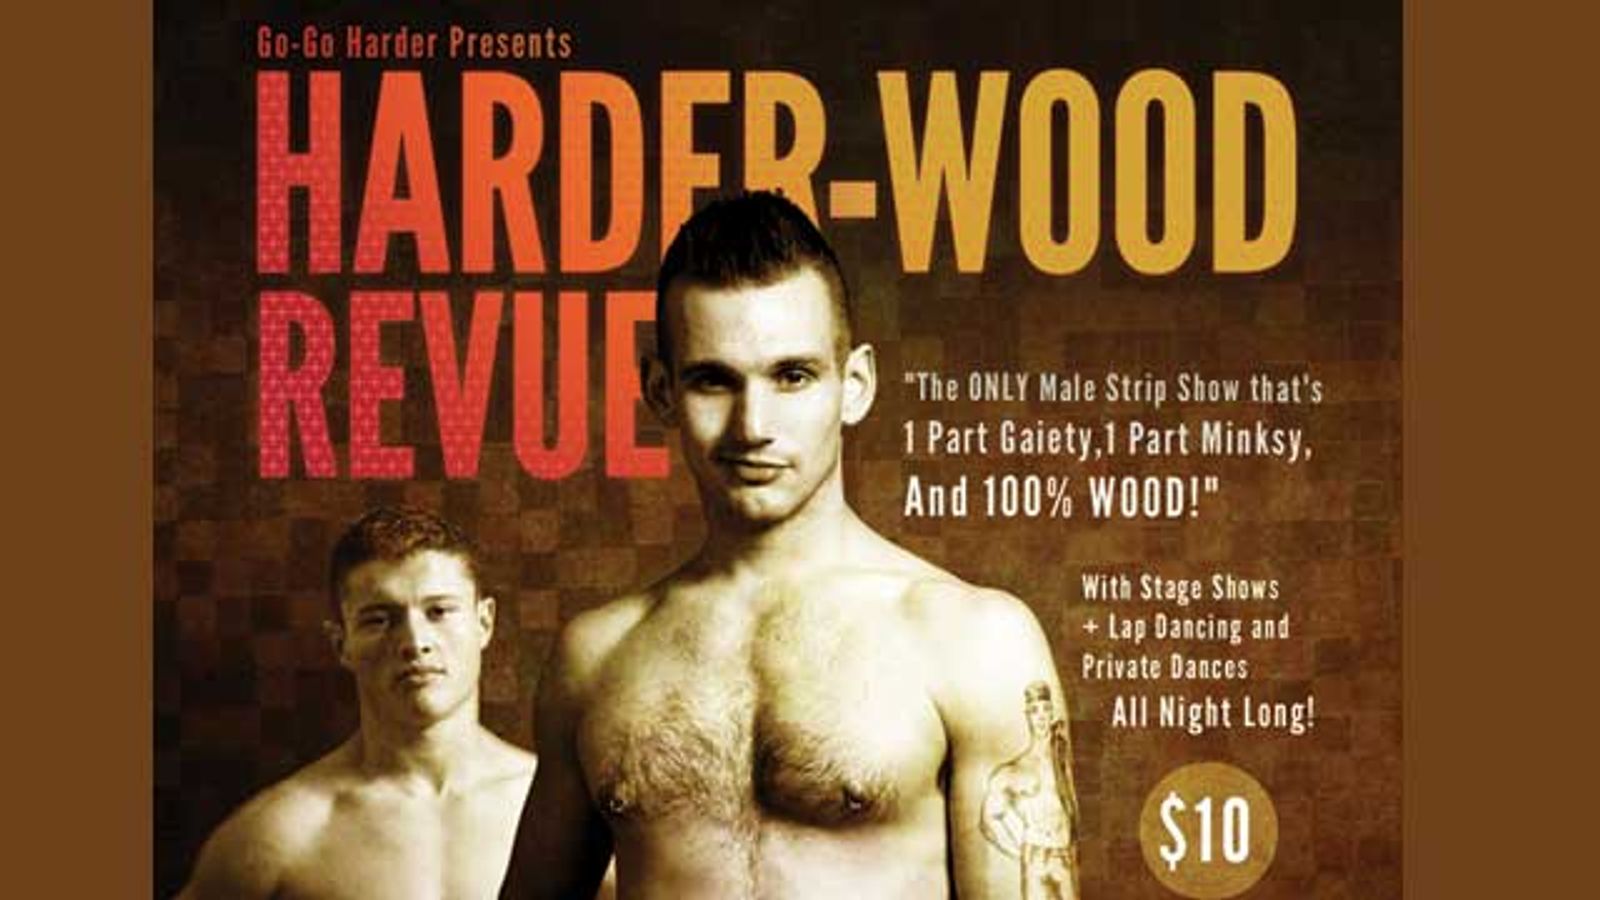 Go-Go Harder’s ‘The Harder-Wood Revue’ at Headquarters Sept. 15